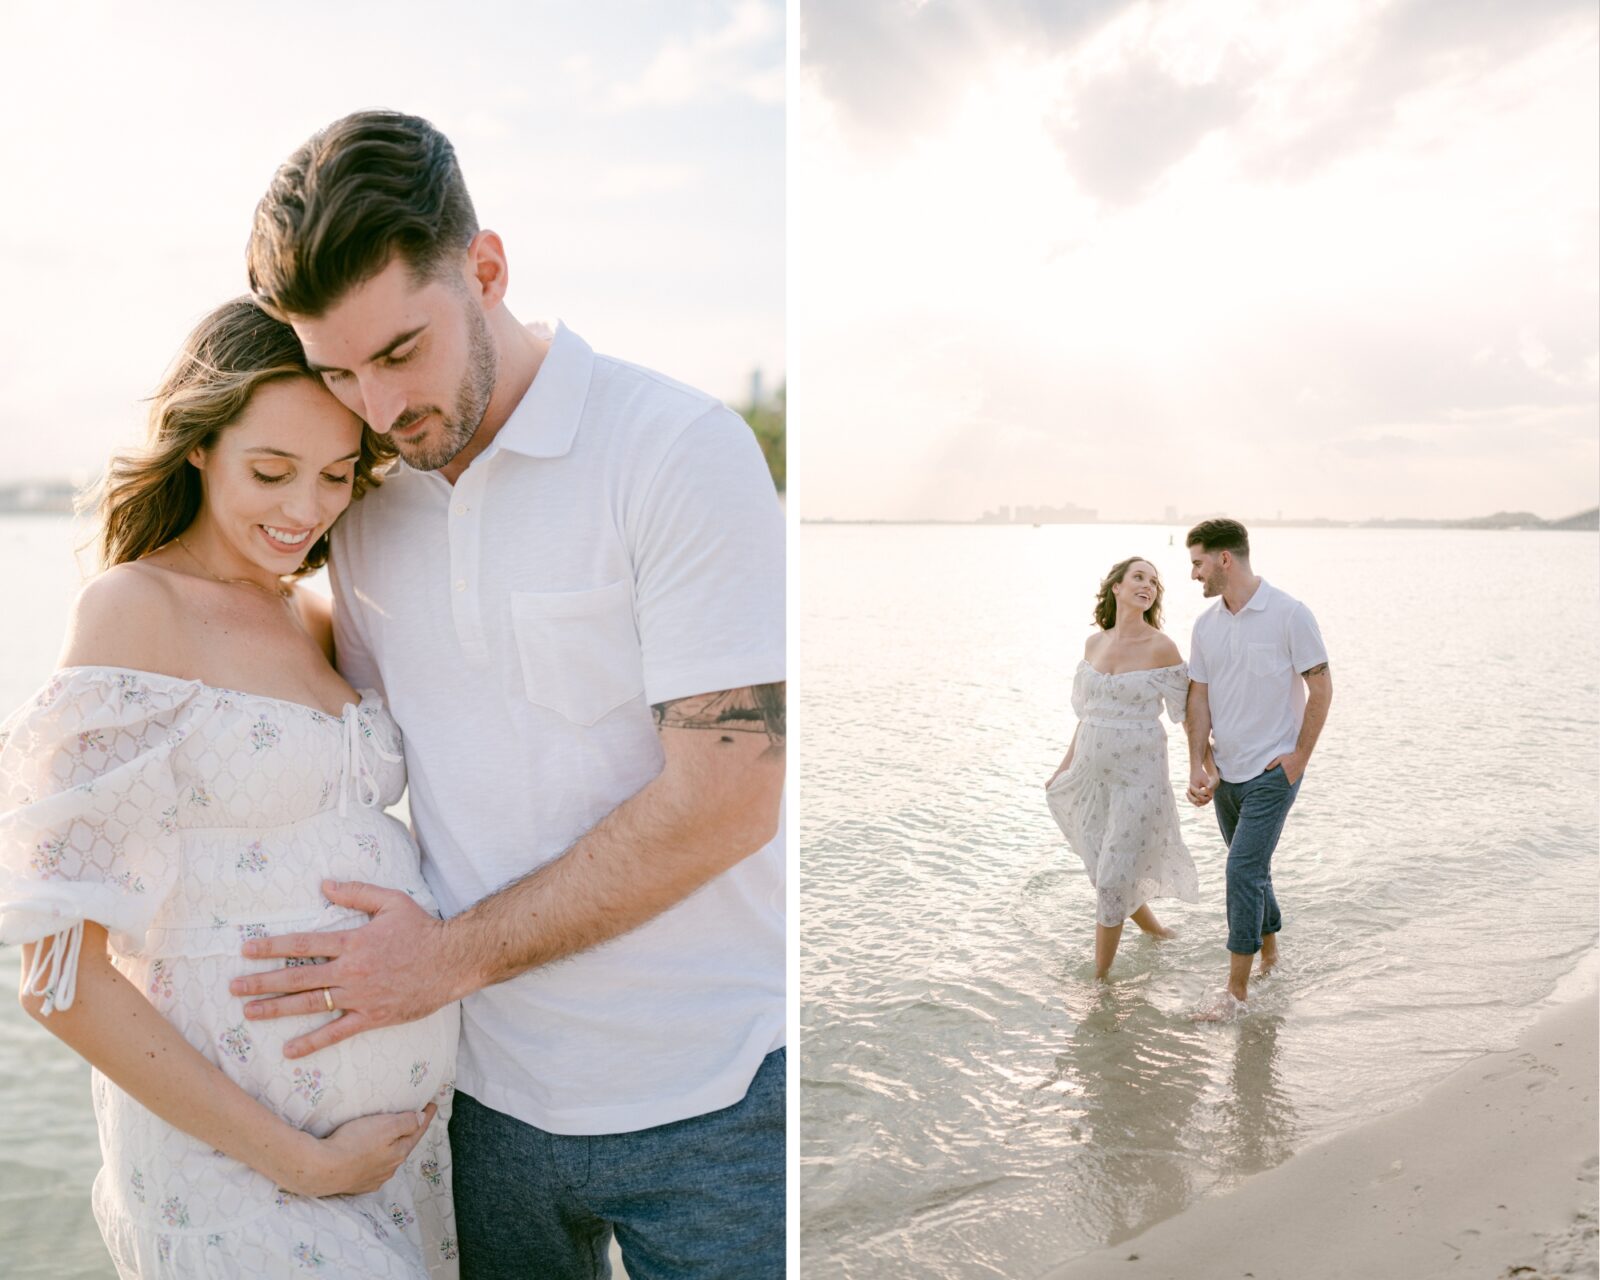 Sunset maternity photos in Key Biscayne, South FL 